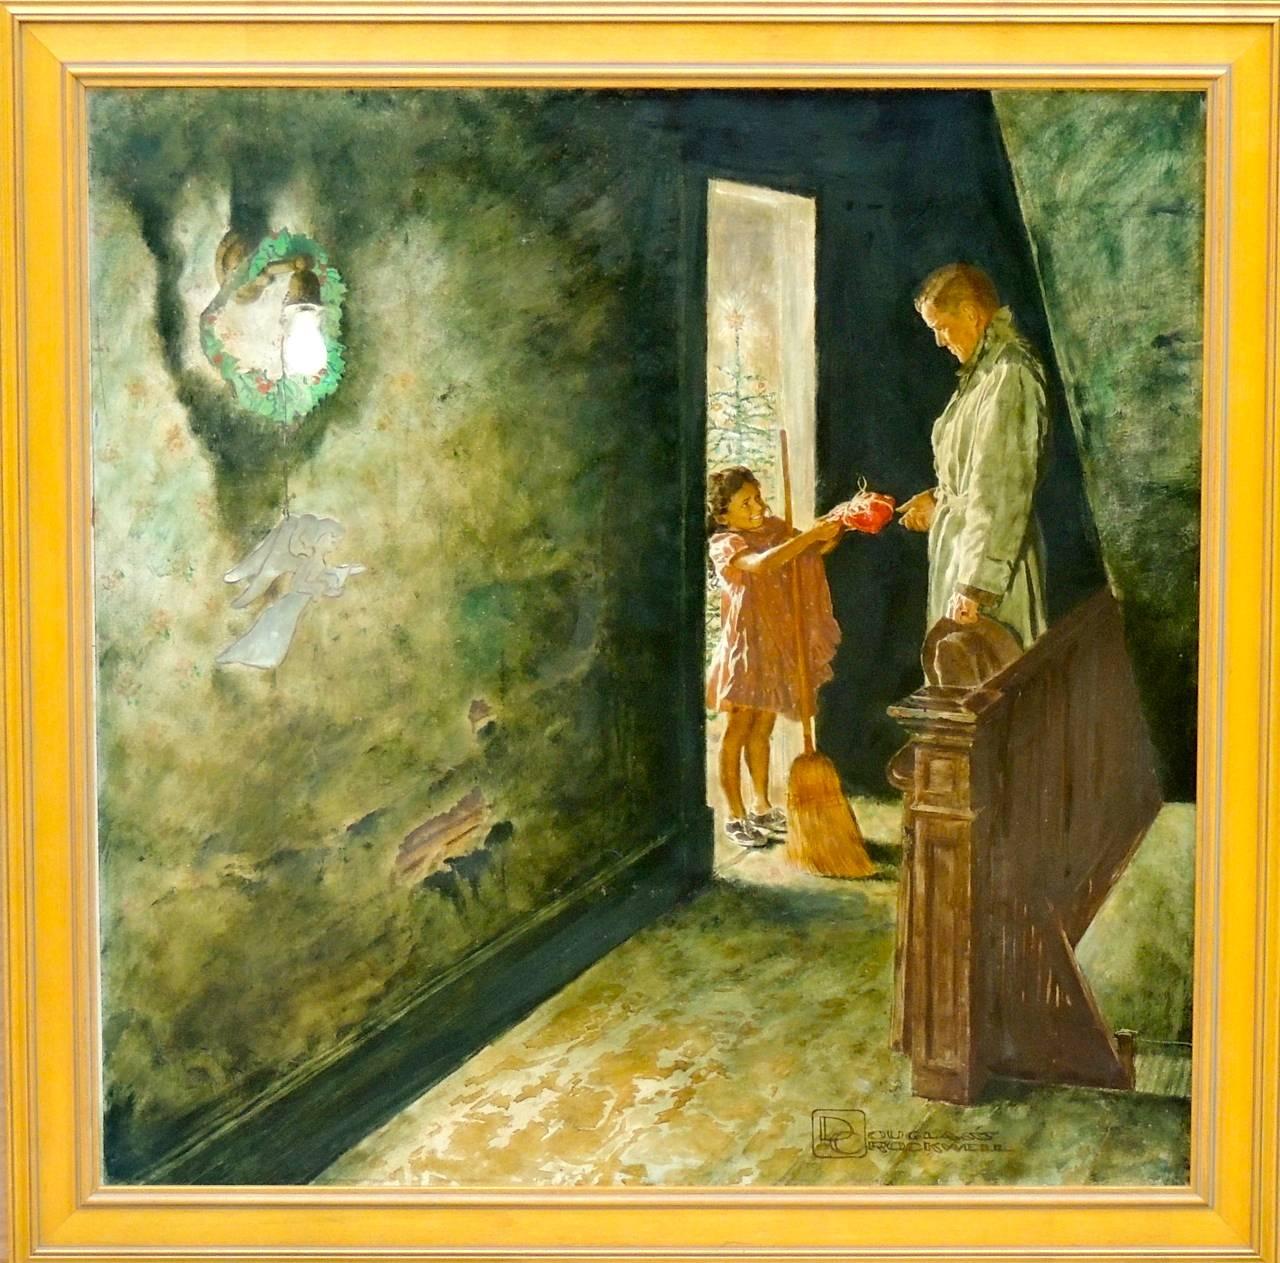 Gift Giving - Painting by Spencer Douglass Crockwell